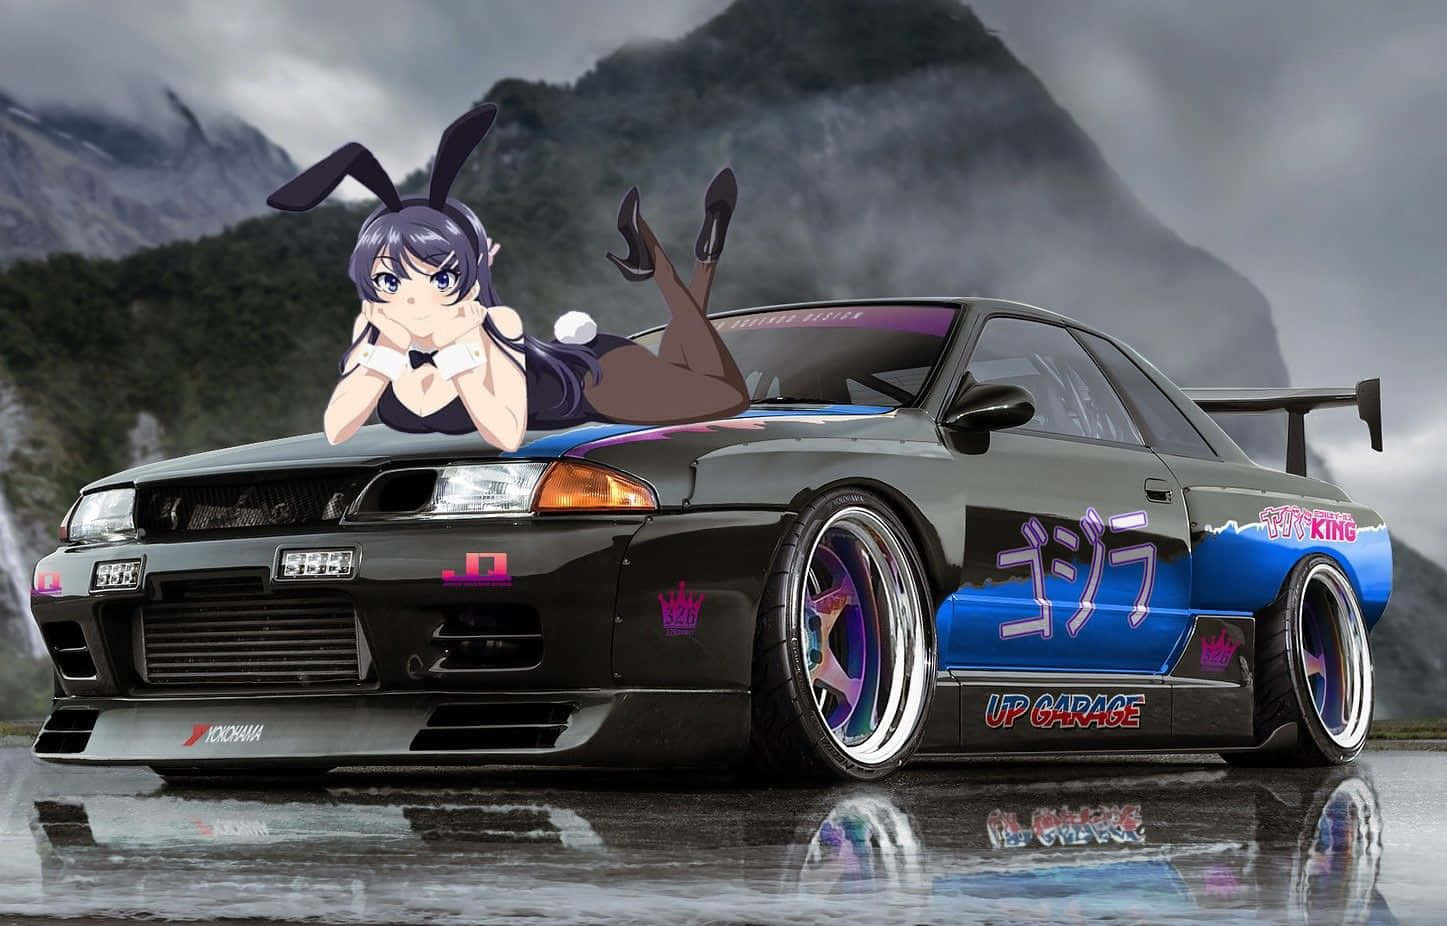 "Drift Into The Endless Possibilities Of Anime" Wallpaper